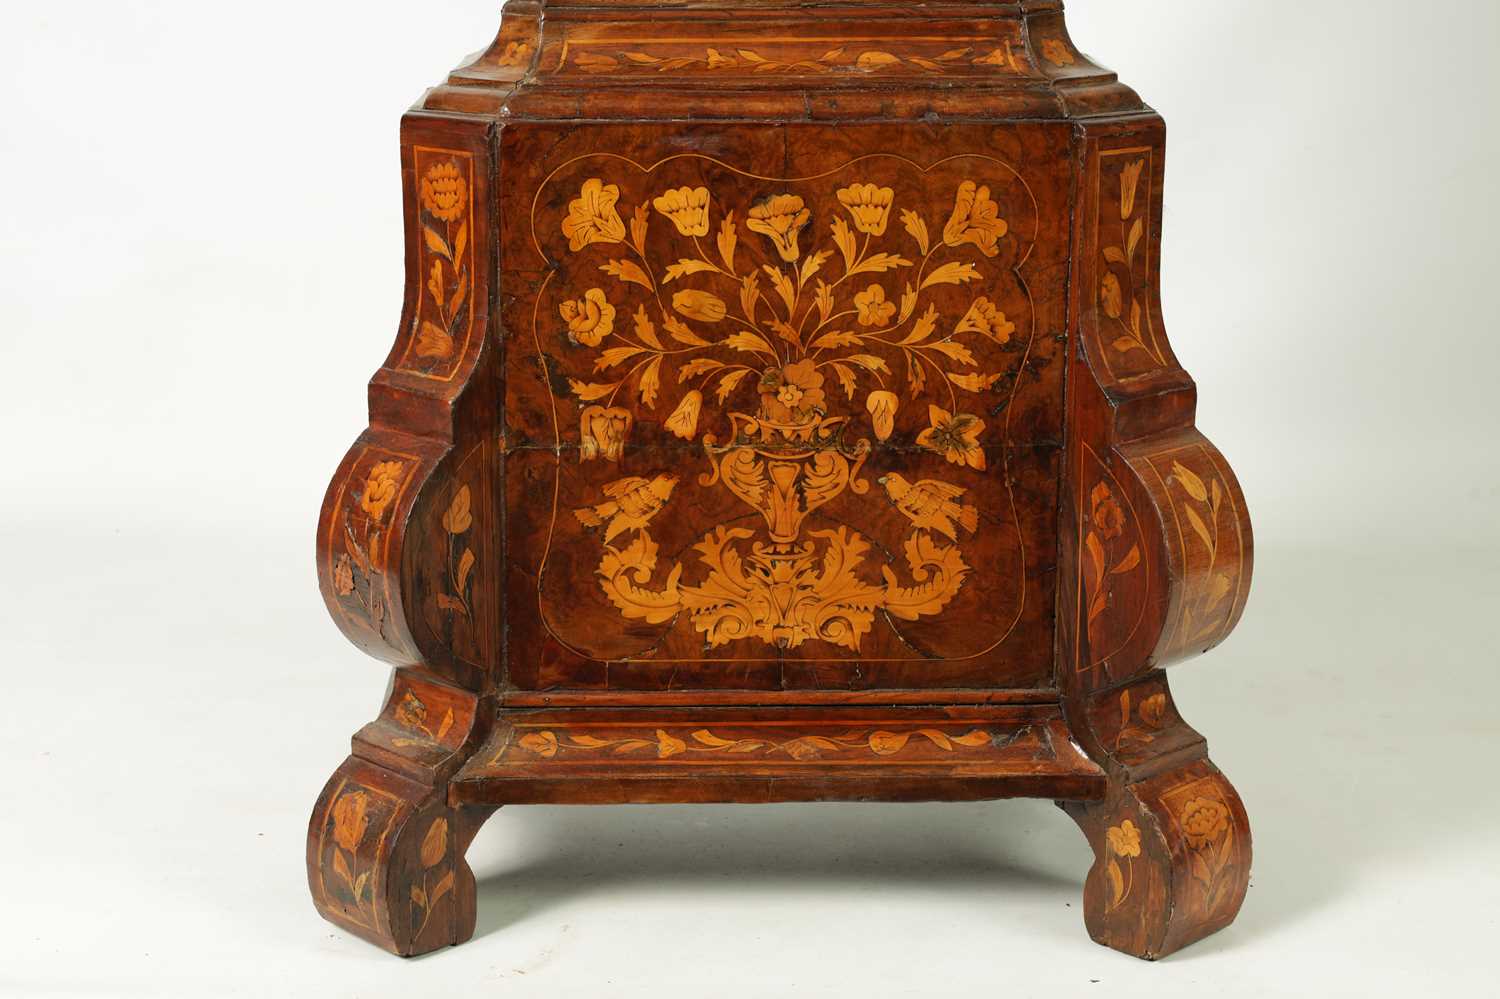 JOHN MARRIOTT, LONDON. A FINE 18TH CENTURY WALNUT AND DUTCH MARQUETRY 8-DAY LONG CASE CLOCK - Image 5 of 13